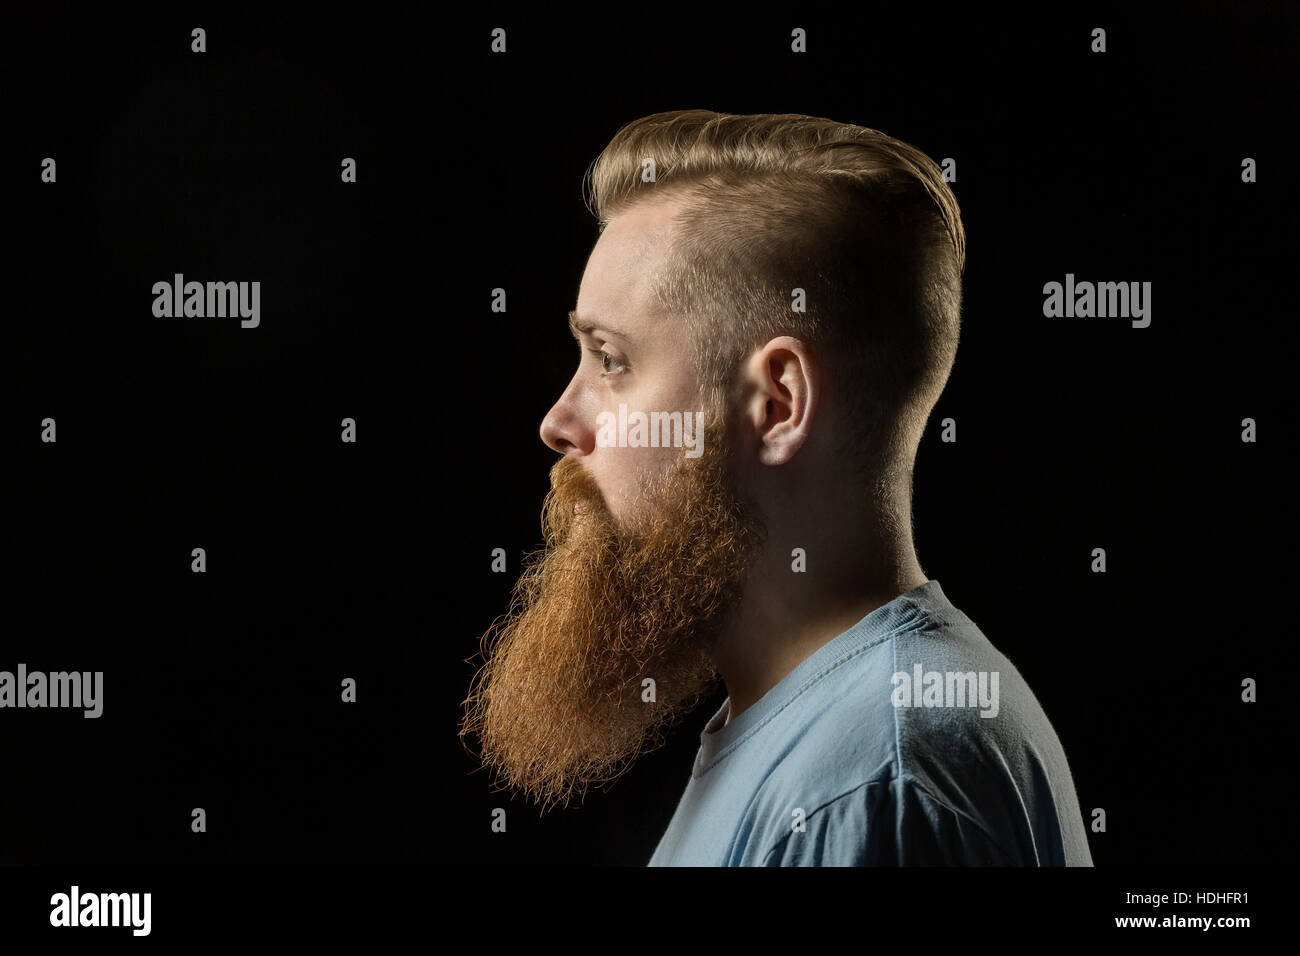 Side view of thoughtful bearded man against black background Stock Photo